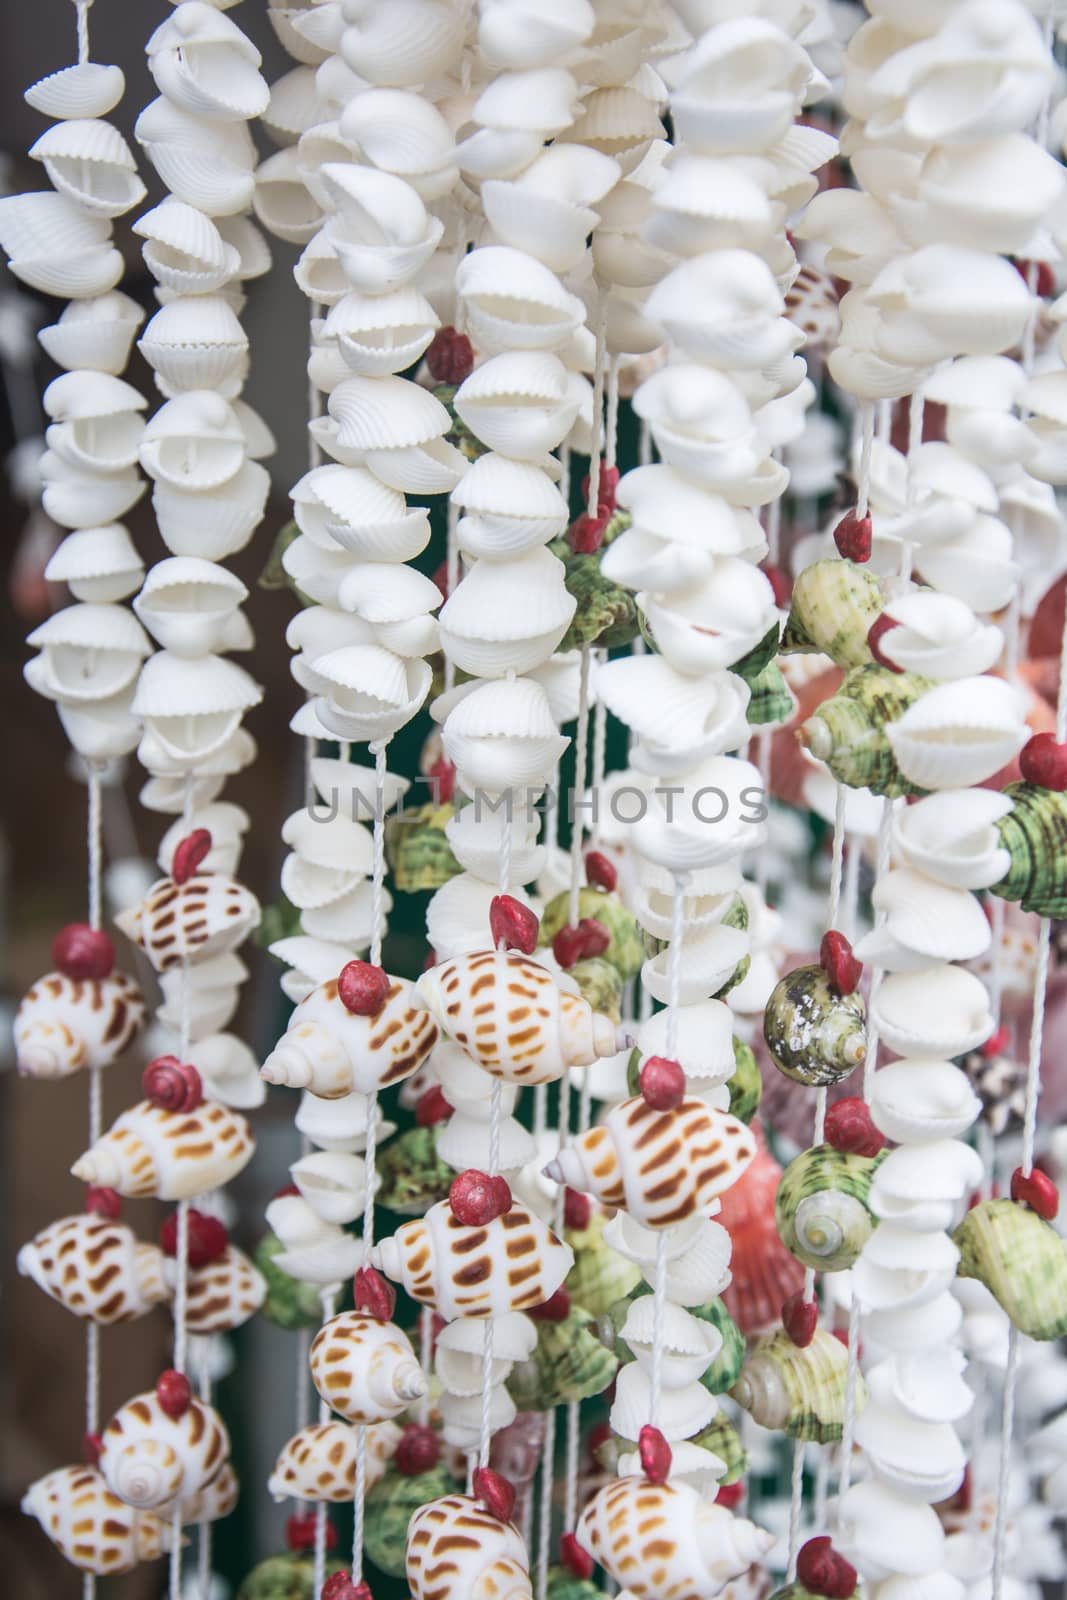 Seashells on rope thread for background, colorful sea shells of various sizes of curtain for background, select focus with shallow depth of field